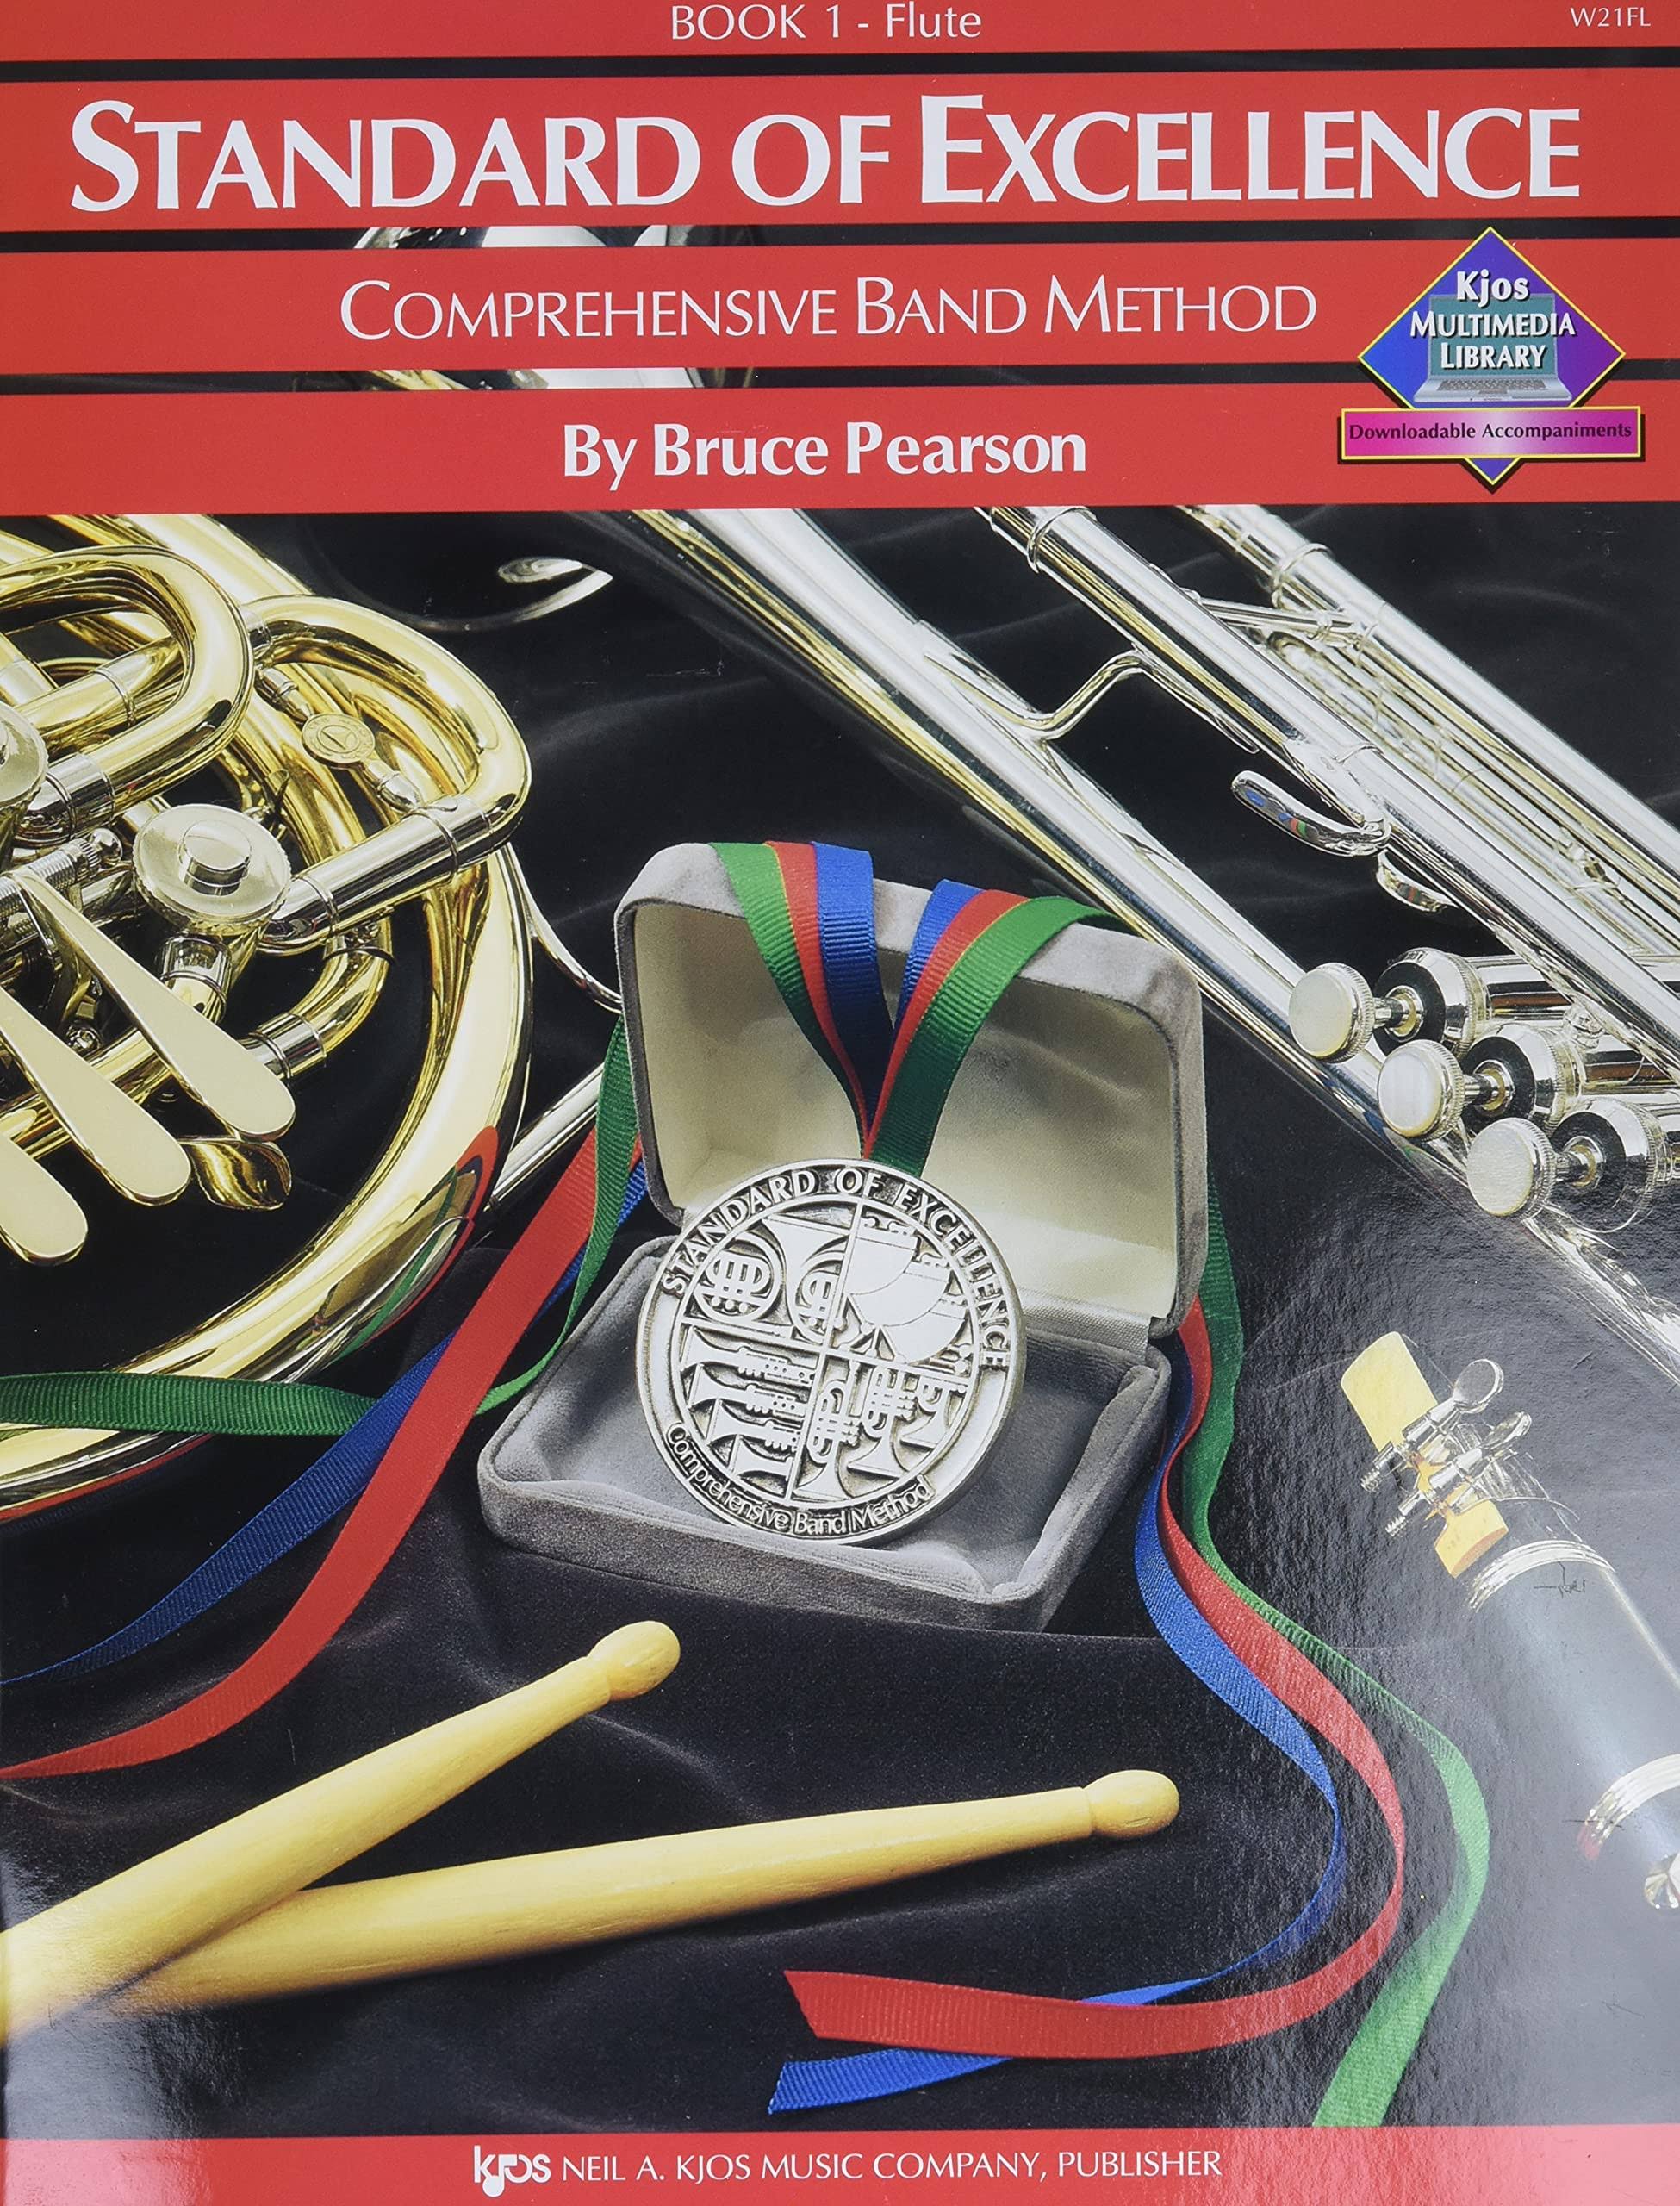 Standard Of Excellence - Comprehensive Band Method Book 1 - Bruce Pearson